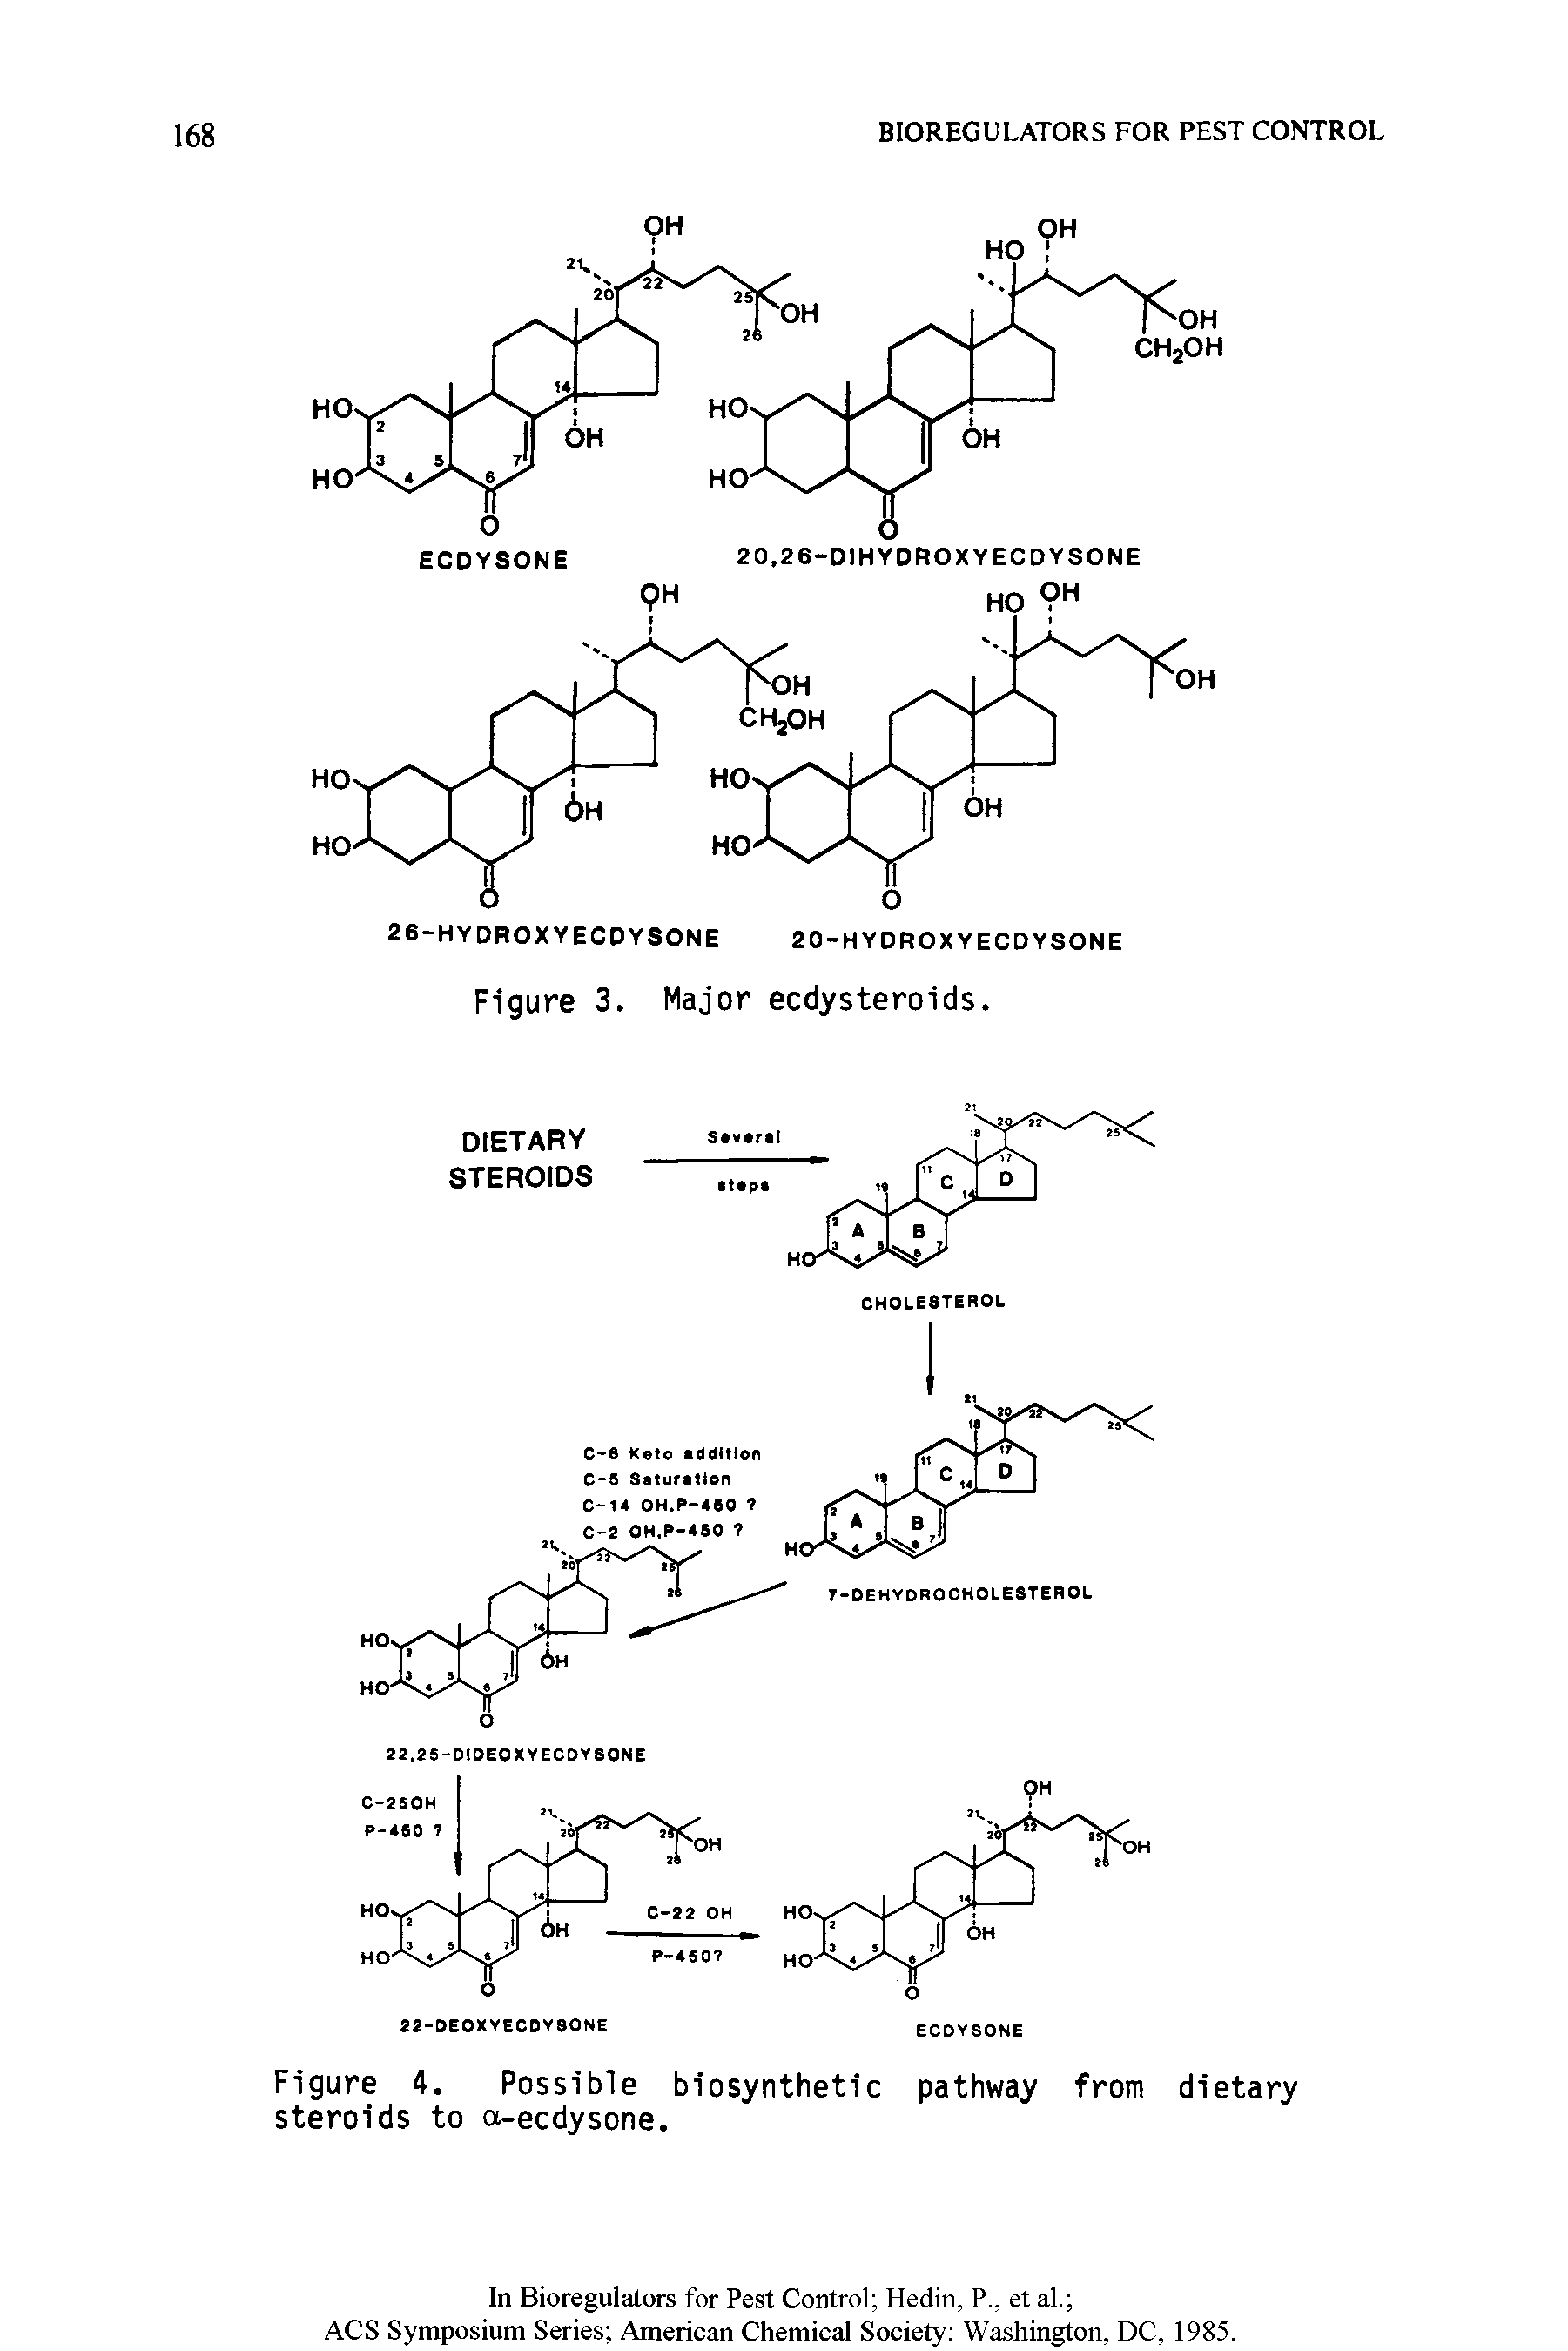 Figure 4. Possible biosynthetic pathway from dietary steroids to a-ecdysone.